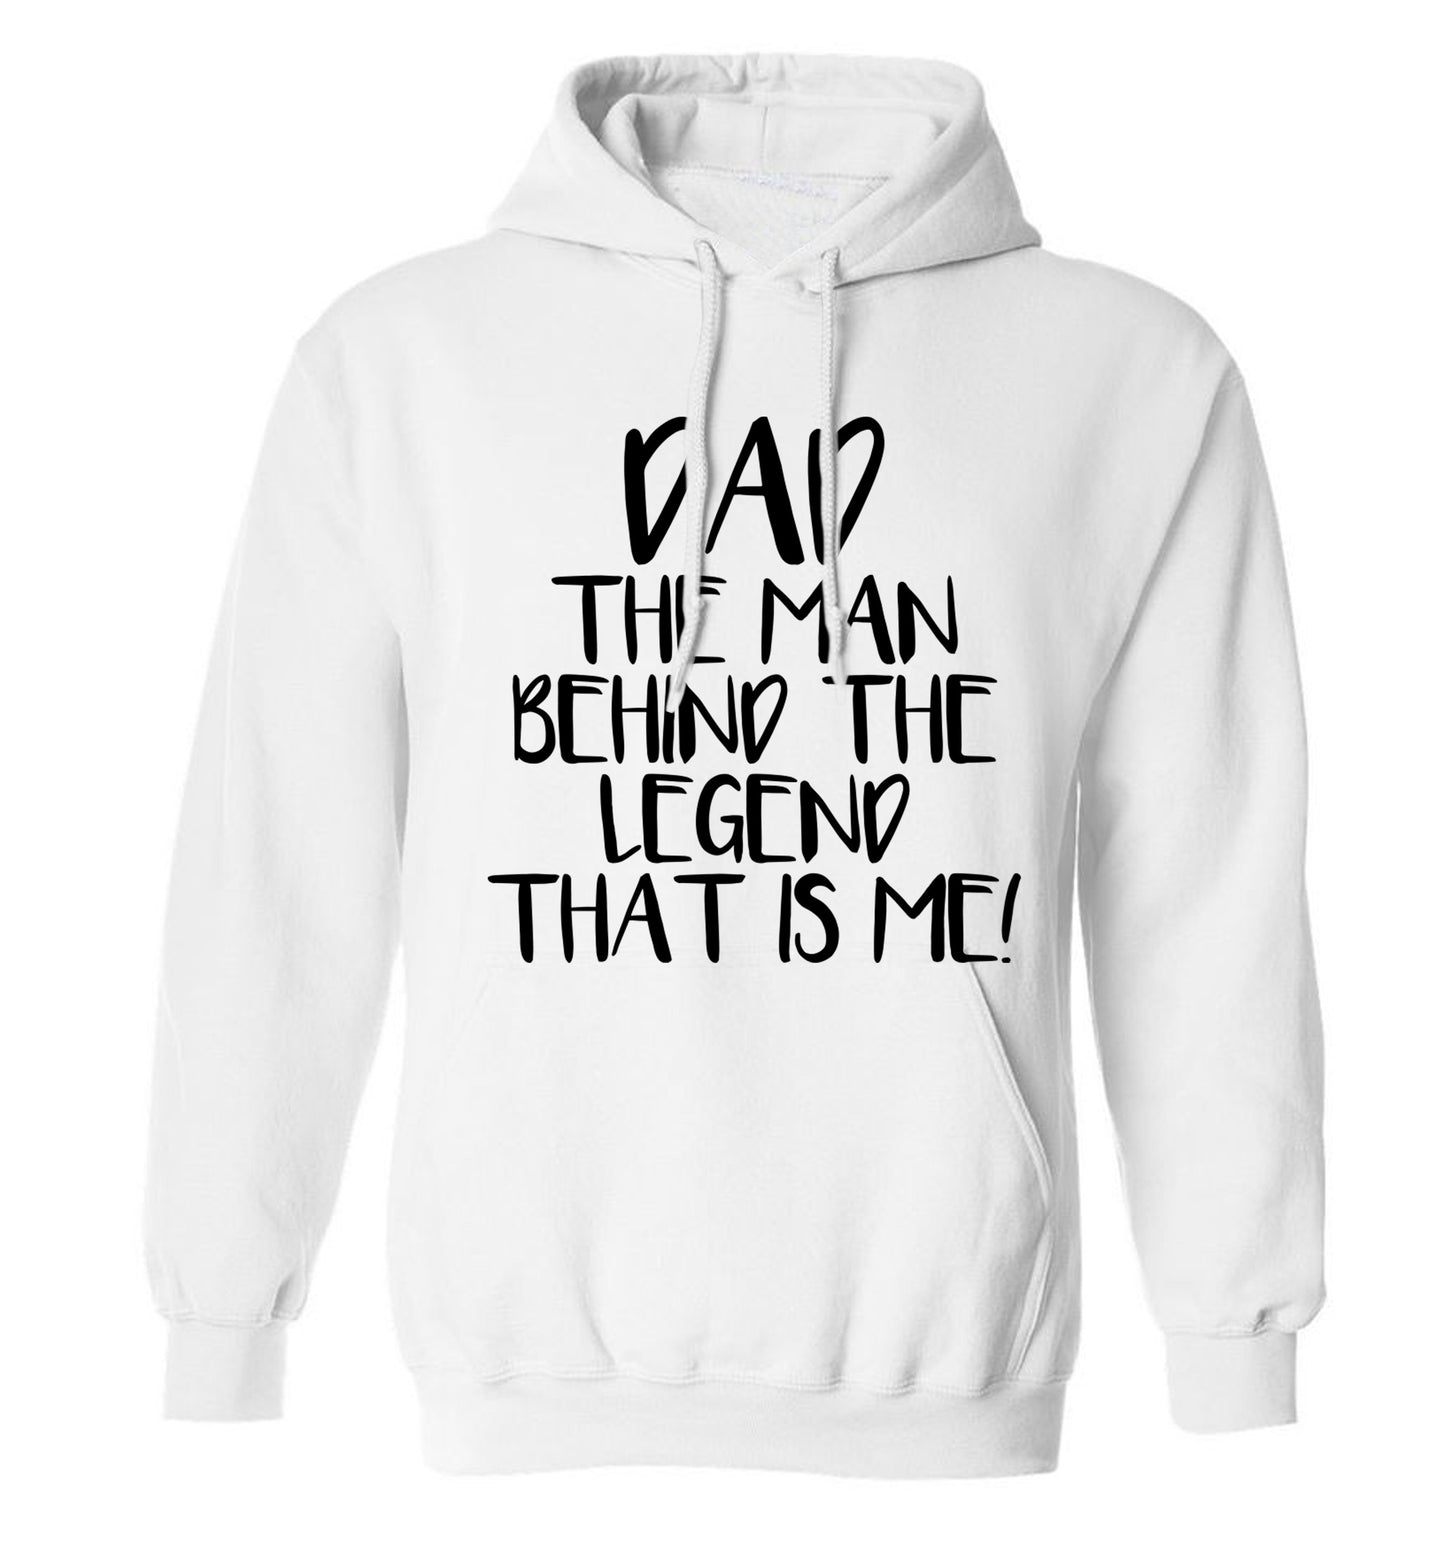 Dad the man behind the legend that is me! adults unisex white hoodie 2XL